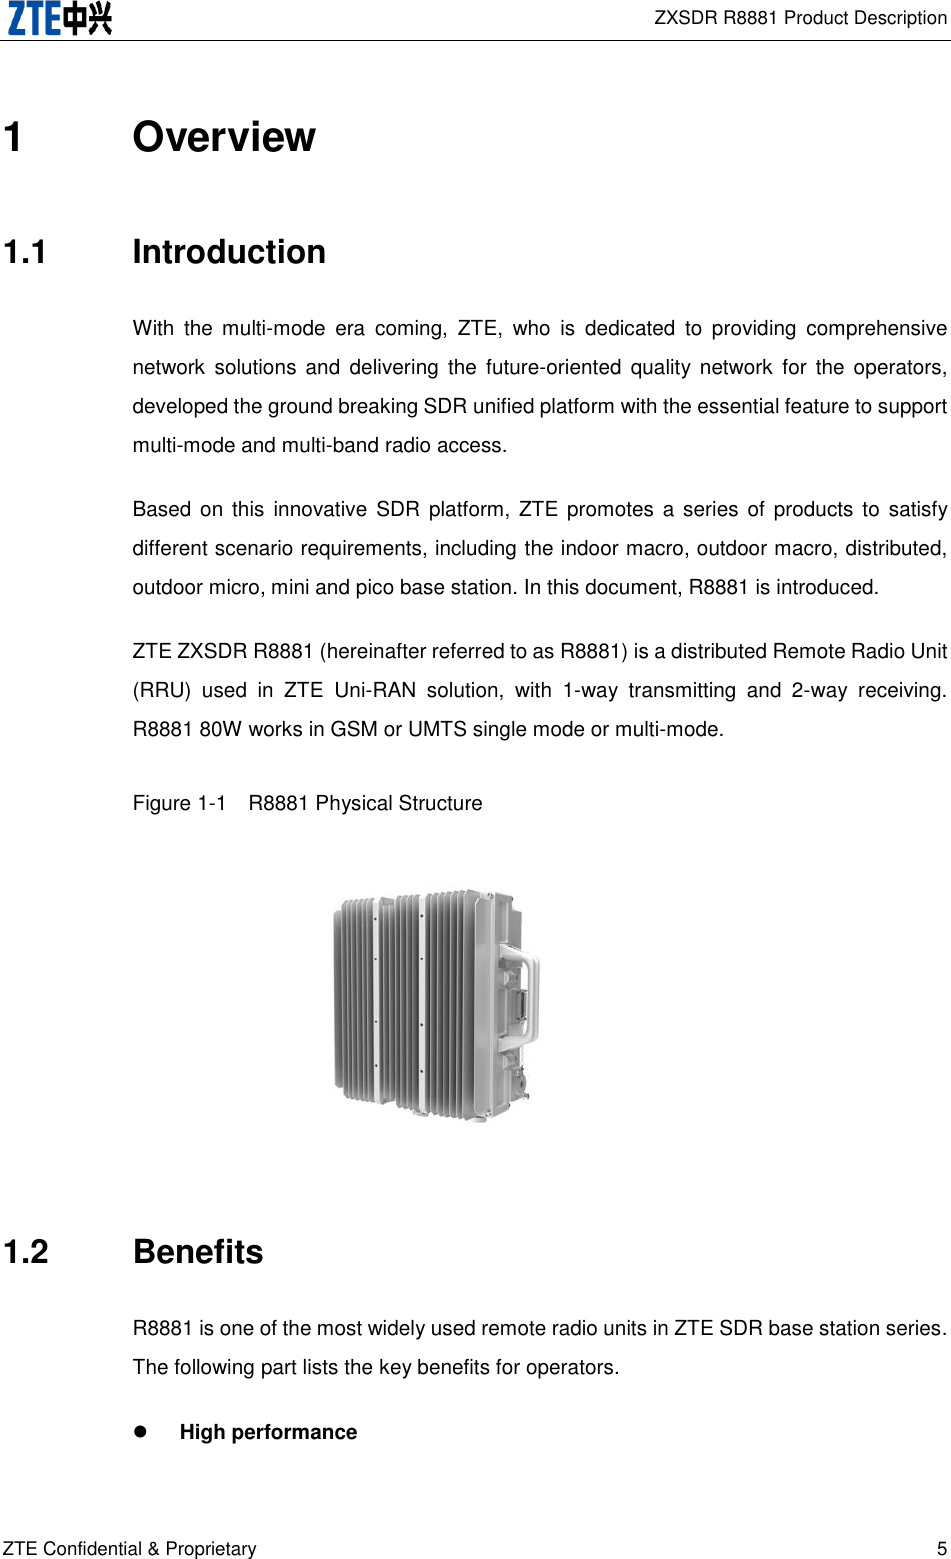  ZXSDR R8881 Product Description ZTE Confidential &amp; Proprietary 5 1  Overview 1.1  Introduction With  the  multi-mode  era  coming,  ZTE,  who  is  dedicated  to  providing  comprehensive network  solutions  and  delivering  the  future-oriented  quality network  for  the operators, developed the ground breaking SDR unified platform with the essential feature to support multi-mode and multi-band radio access. Based on this  innovative  SDR  platform,  ZTE promotes  a  series of  products  to  satisfy different scenario requirements, including the indoor macro, outdoor macro, distributed, outdoor micro, mini and pico base station. In this document, R8881 is introduced. ZTE ZXSDR R8881 (hereinafter referred to as R8881) is a distributed Remote Radio Unit (RRU)  used  in  ZTE  Uni-RAN  solution,  with  1-way  transmitting  and  2-way  receiving. R8881 80W works in GSM or UMTS single mode or multi-mode. Figure 1-1  R8881 Physical Structure      1.2  Benefits R8881 is one of the most widely used remote radio units in ZTE SDR base station series. The following part lists the key benefits for operators.  High performance 